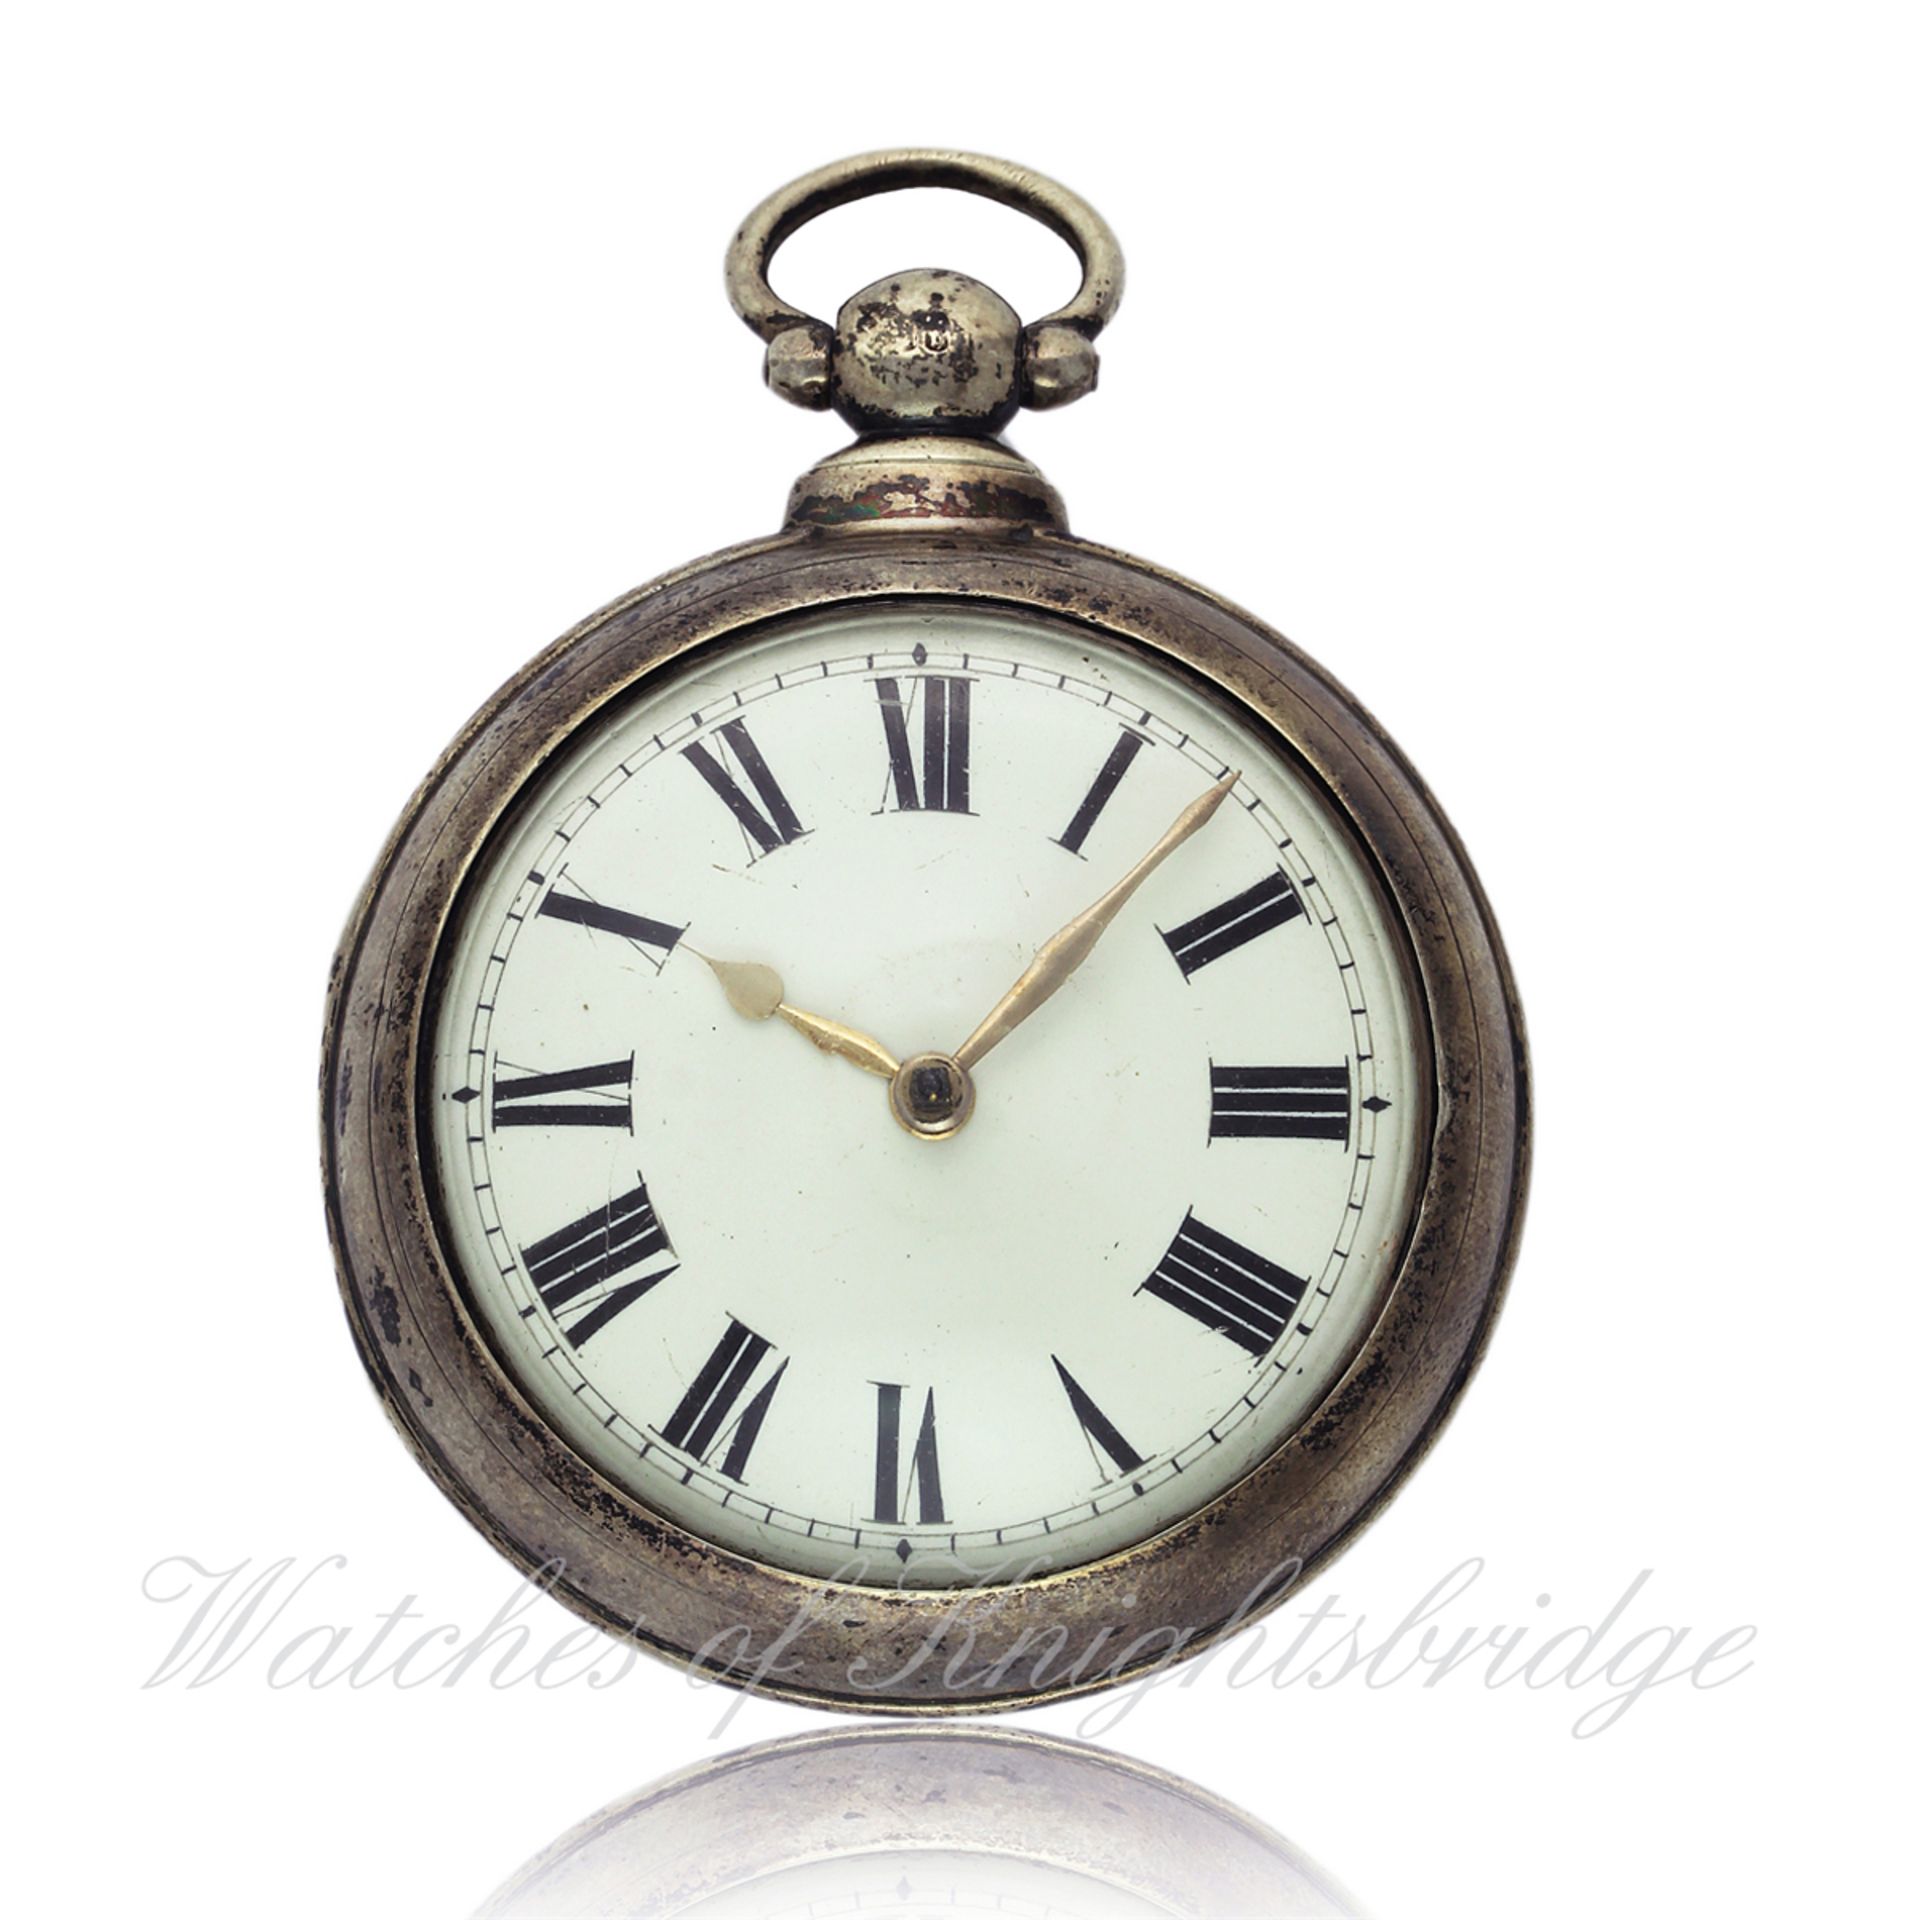 A GENTLEMAN`S SOLID SILVER PAIR CASED FUSEE VERGE POCKET WATCH CIRCA 1830 D: Enamel dial with